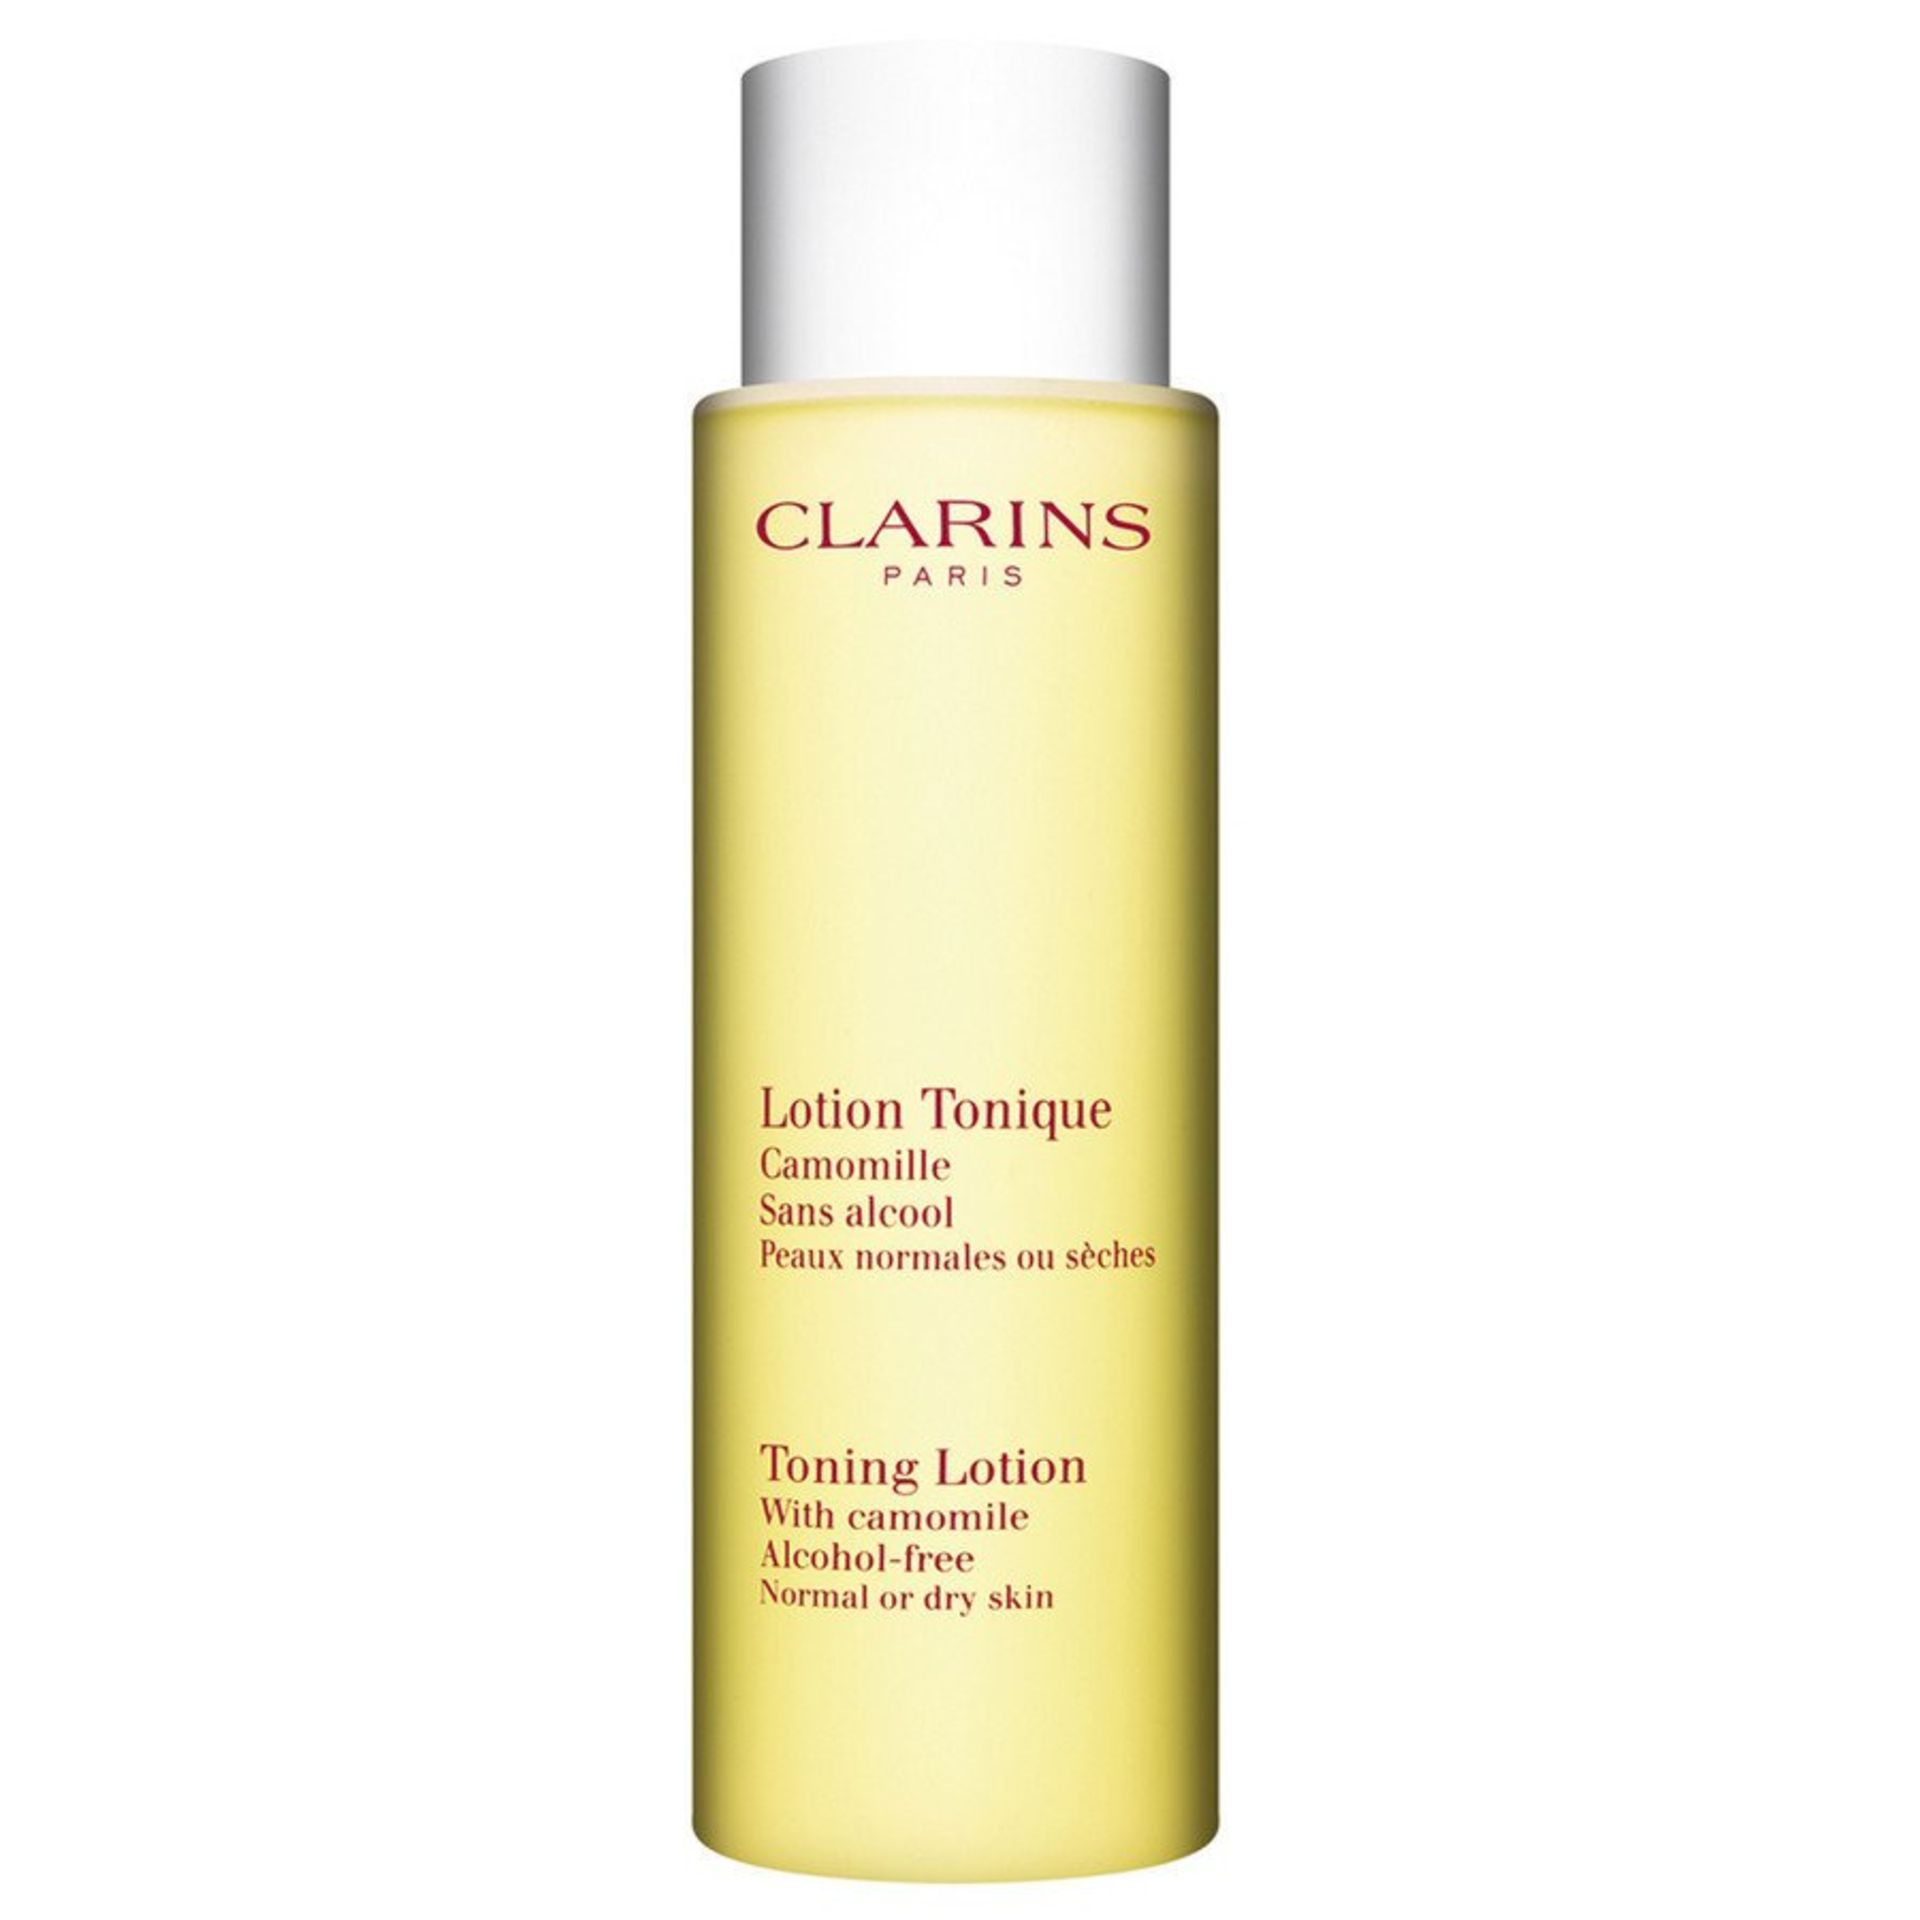 V Brand New Clarins Toning Lotion 200ml Normal/Dry Skin